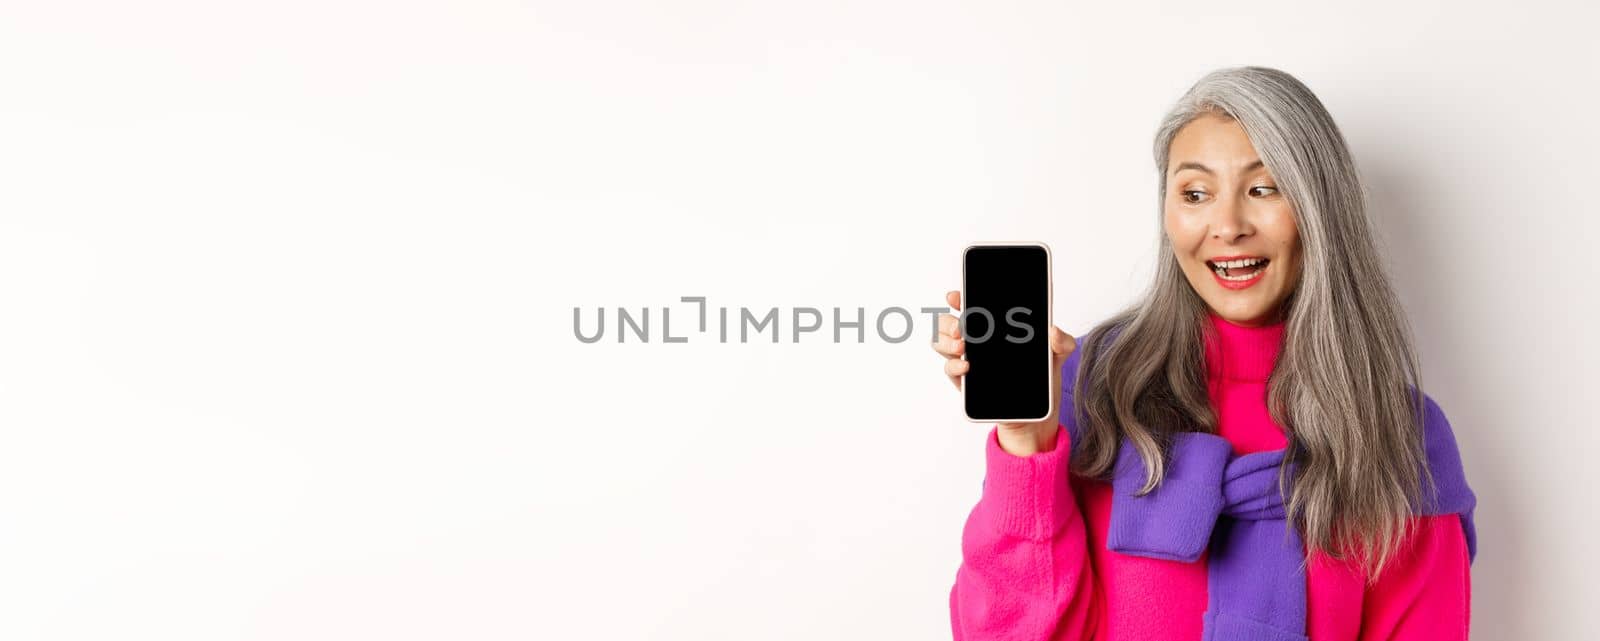 Online shopping. Stylish and beautiful asian senior woman with grey hair, showing blank smartphone screen and looking pleased, standing over white background.